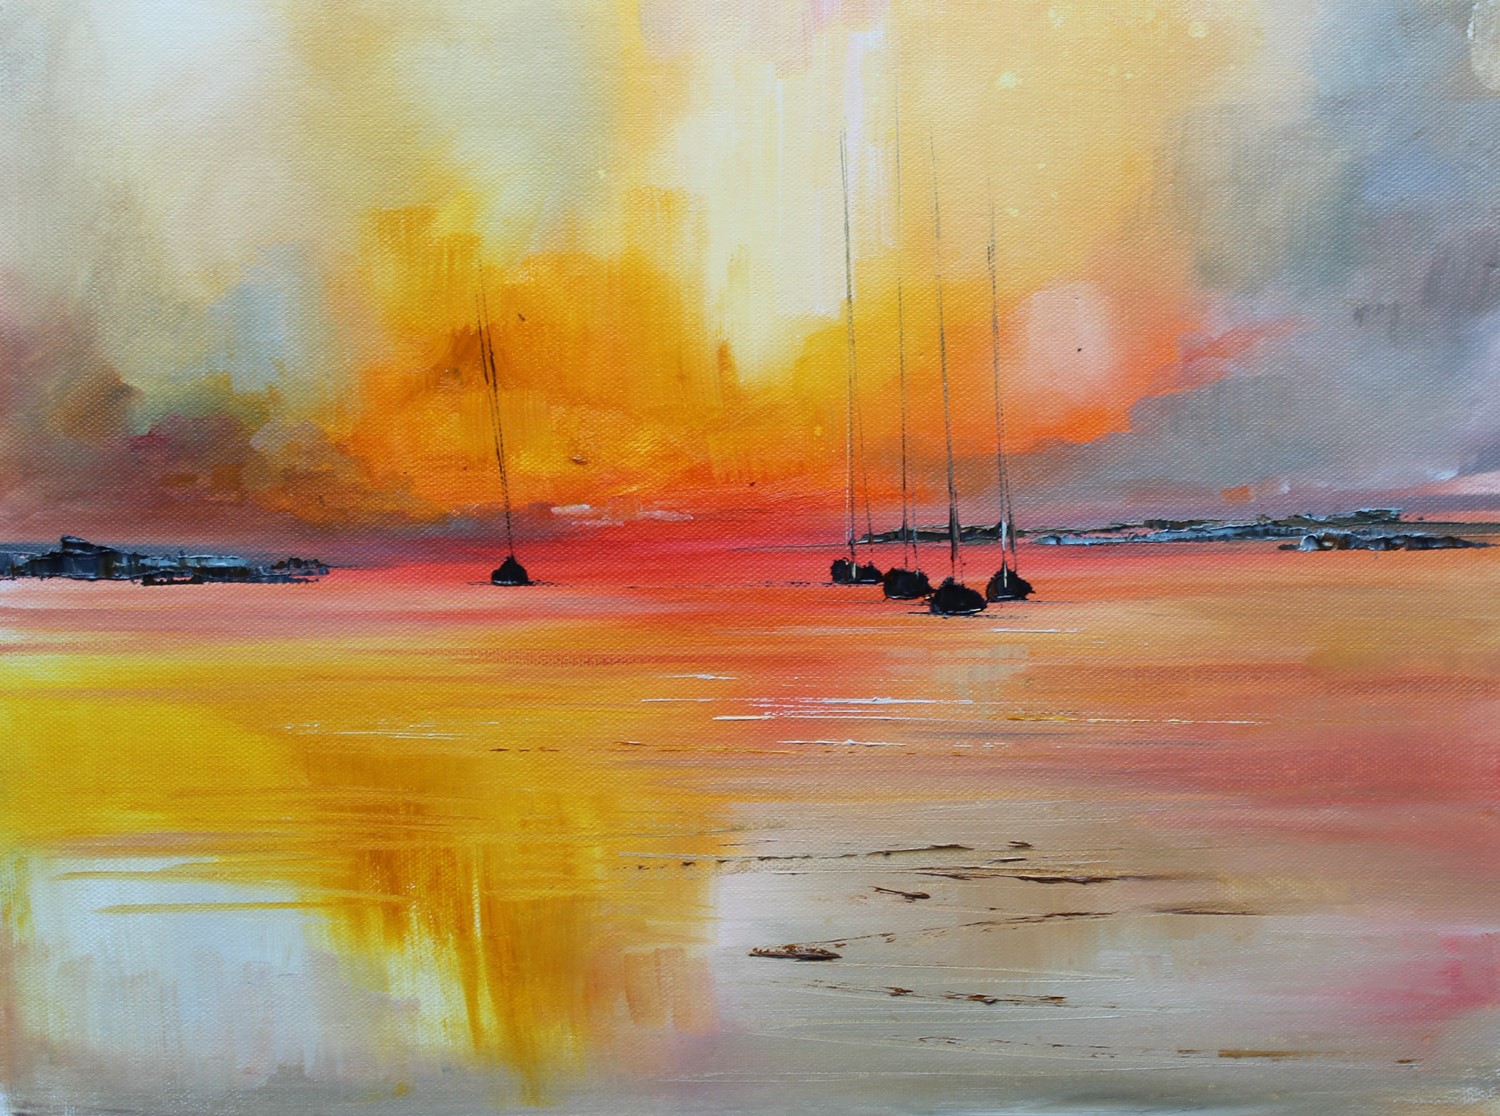 'A Sunset Fire in the sky' by artist Rosanne Barr